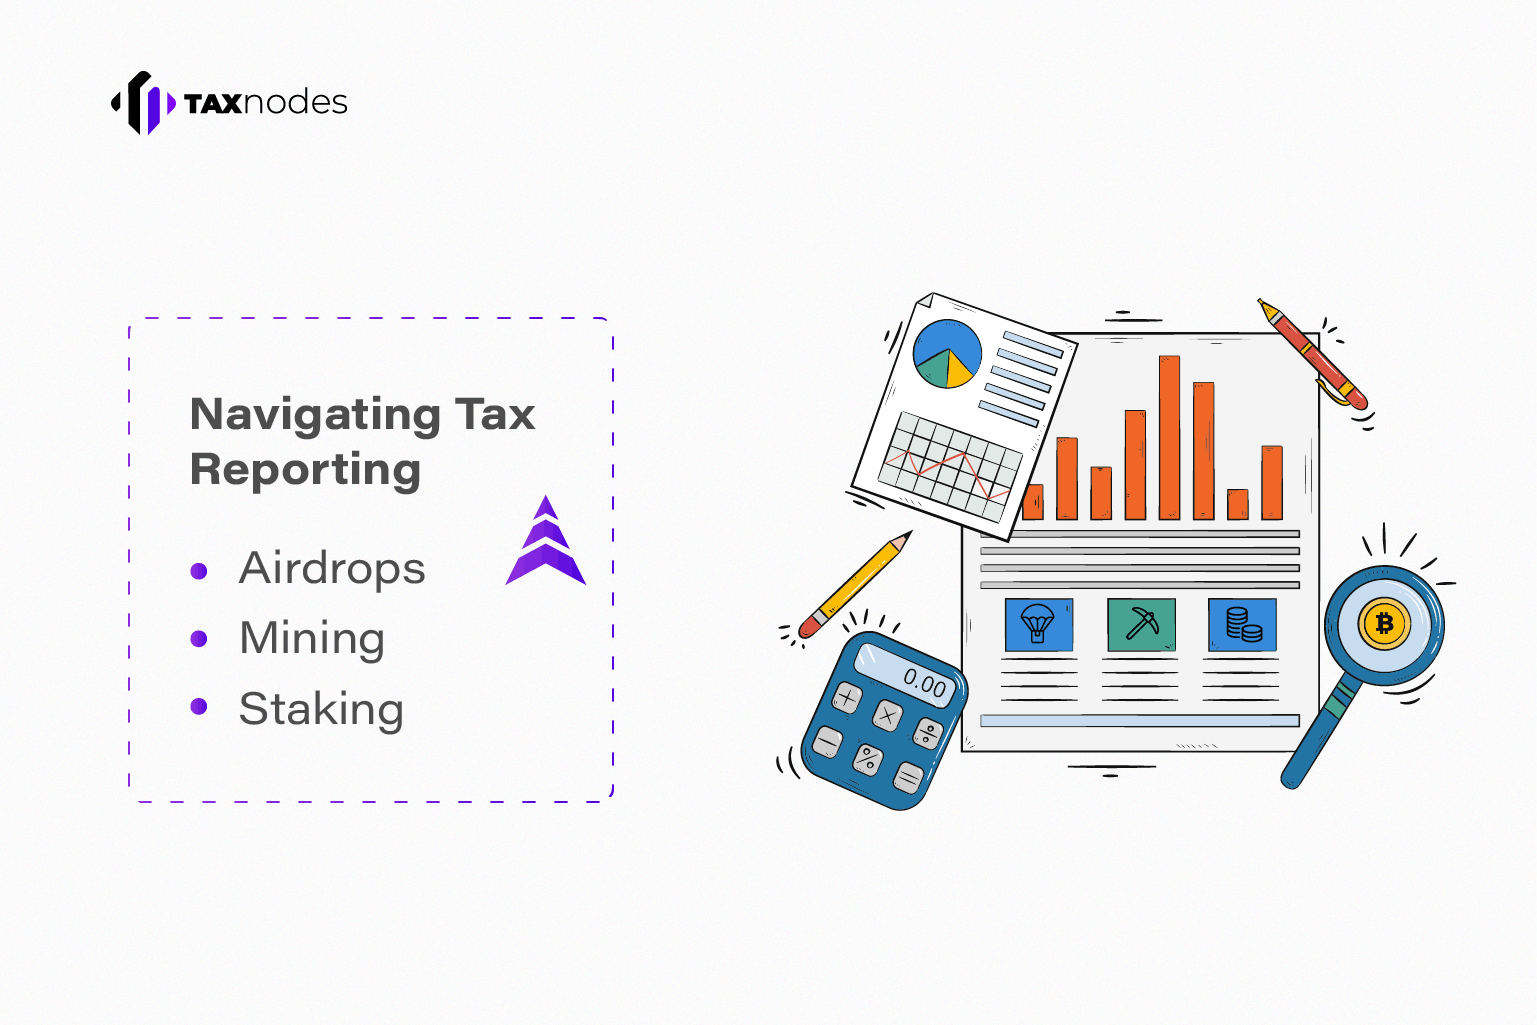 Navigating tax reporting for airdrops, mining, and staking rewards